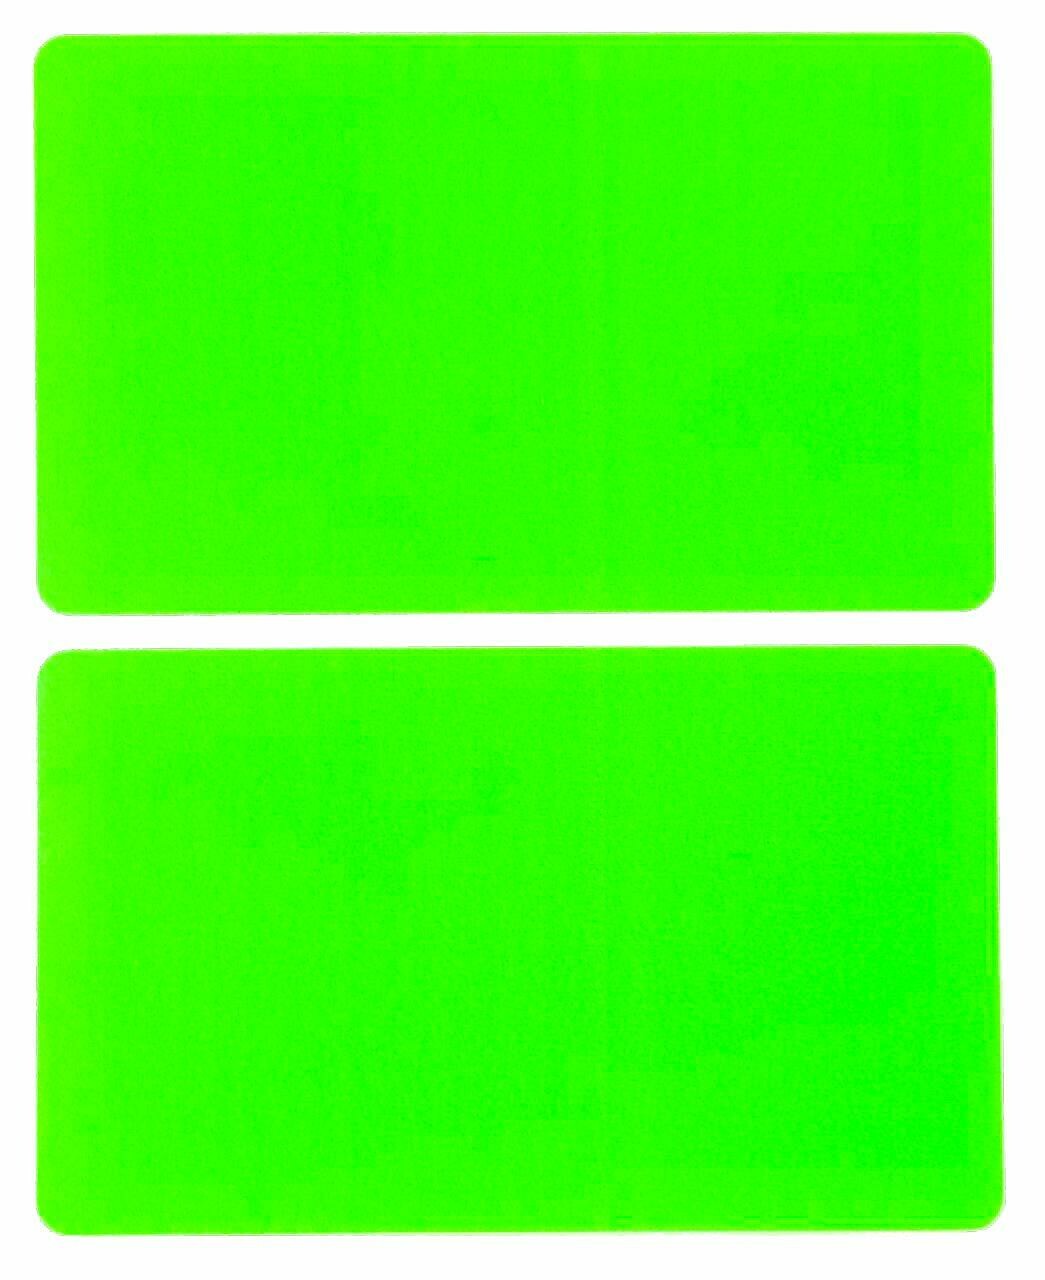 Tag-A-Room Color Coded Labels 2" x 3" Stickers 50 Count - Green